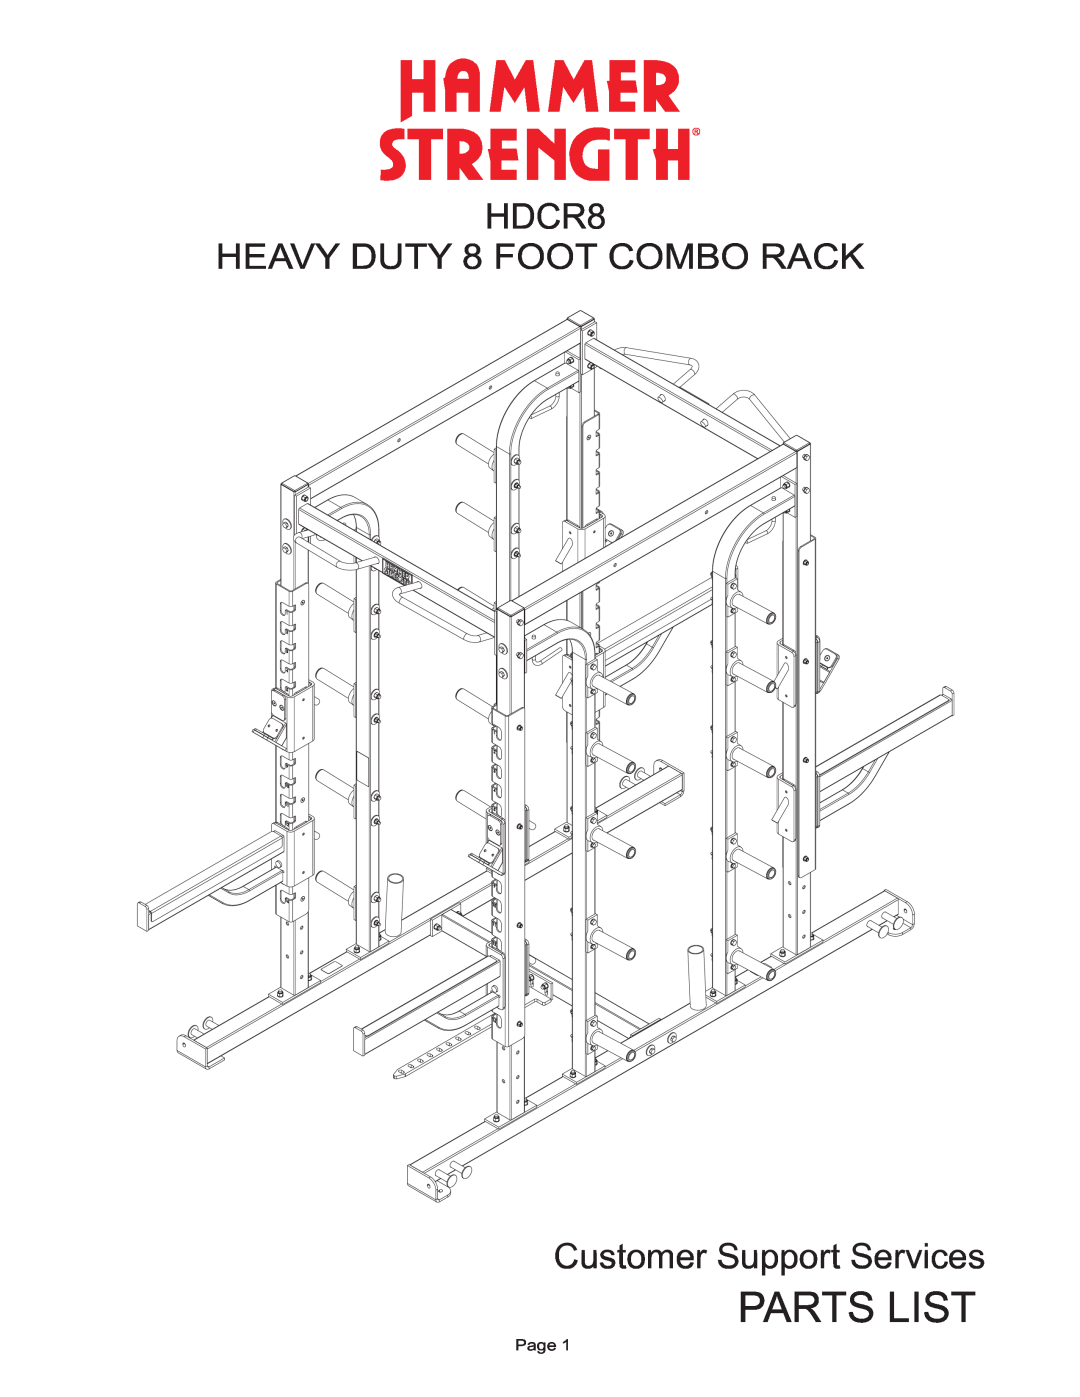 Life Fitness manual Parts List, HDCR8 HEAVY DUTY 8 FOOT COMBO RACK Customer Support Services, Page 